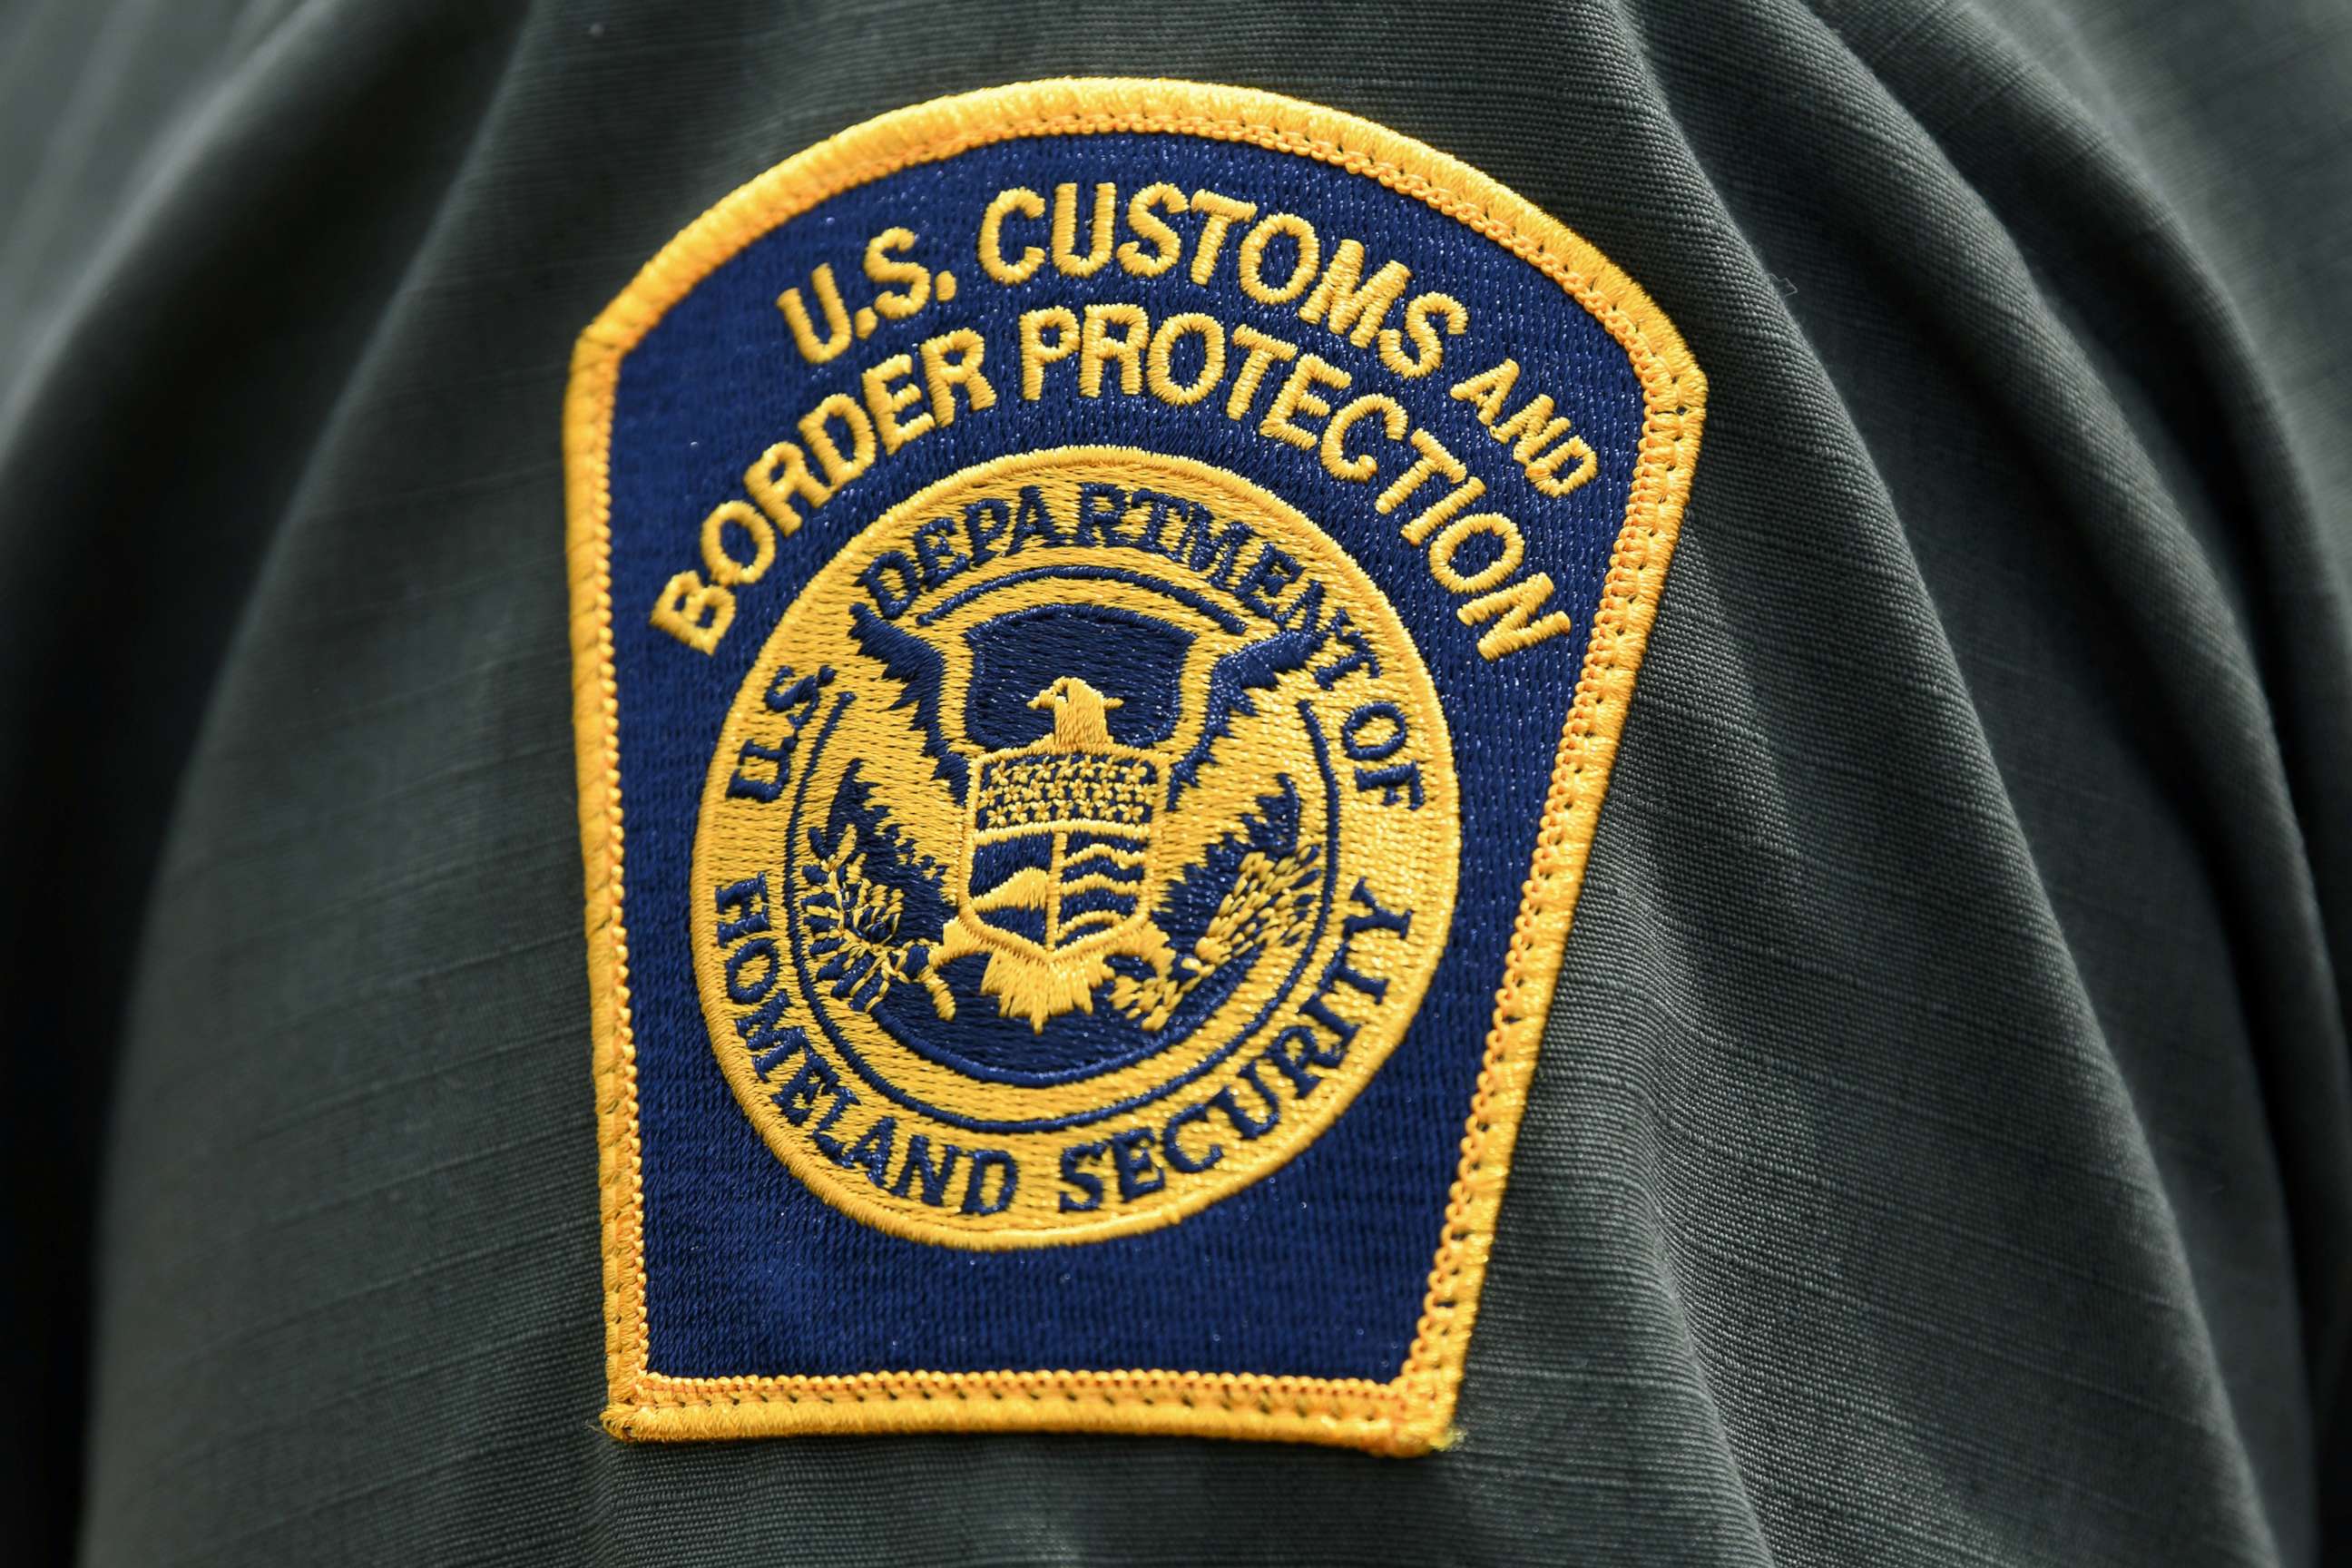 PHOTO: In this July 1, 2019, file photo, a U.S. Customs and Border Protection patch is seen on the arm of a U.S. Border Patrol agent in Mission, Texas.